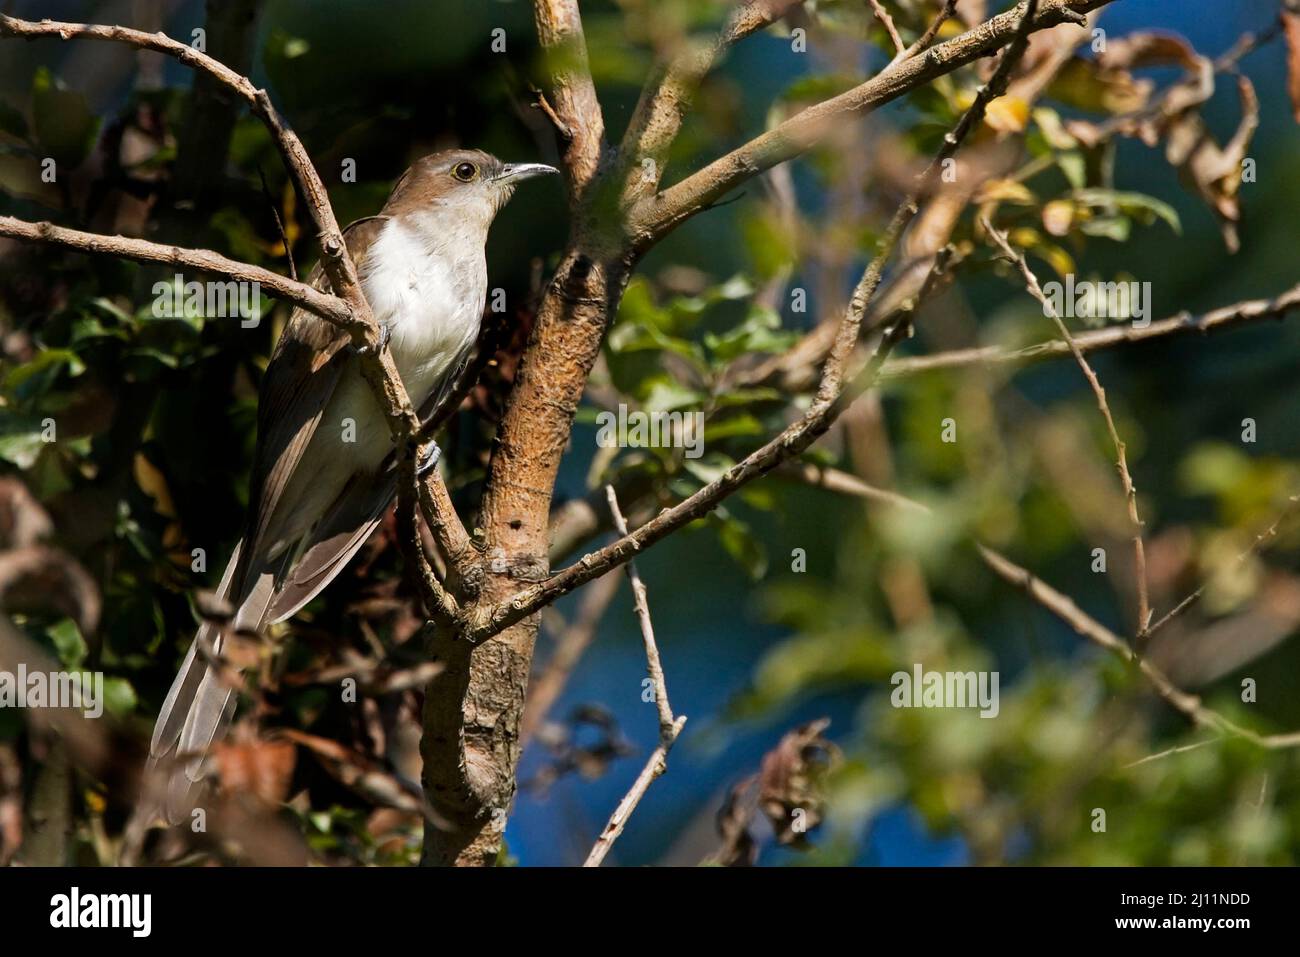 A Black-billed Cuckoo, Coccyzus erythropthalmus, perched in tree Stock Photo